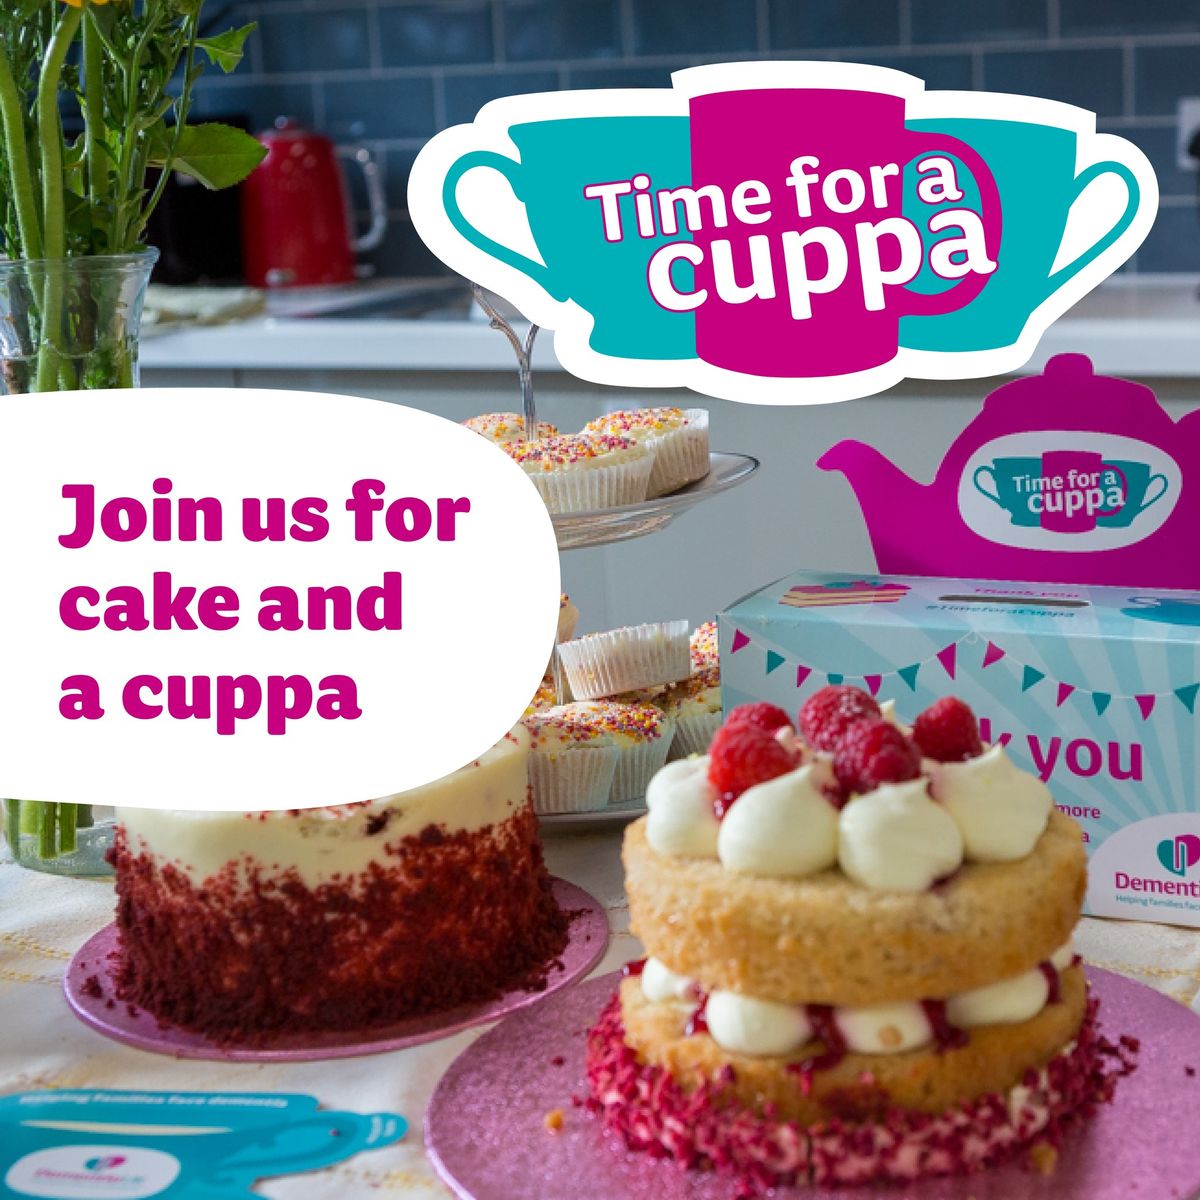 Time For A Cuppa - Dementia UK Fundraiser at The Royal Oak Cossington